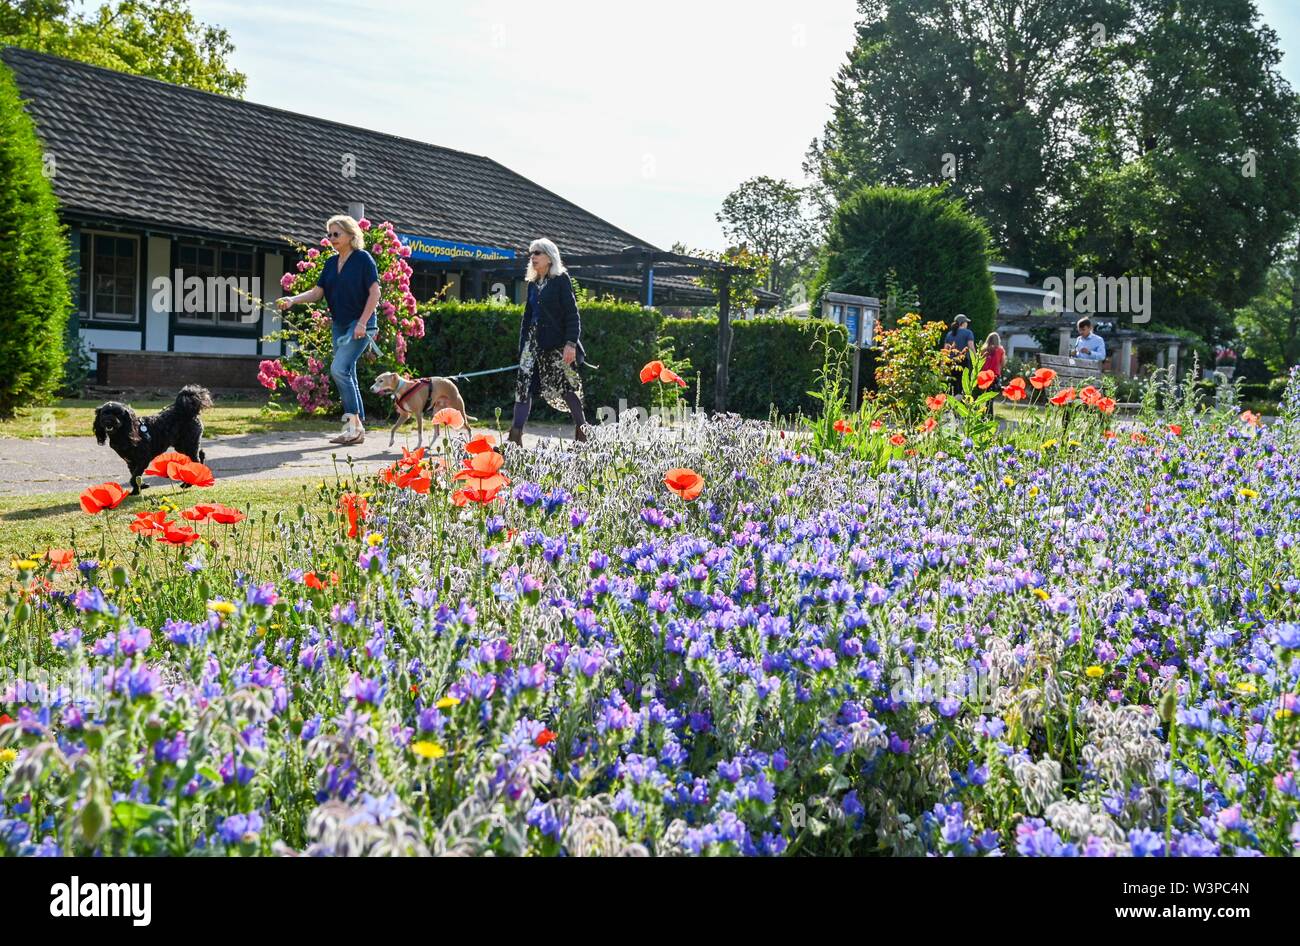 Brighton UK 16th July 2019 - Dog walkers enjoy a beautiful sunny warm morning at the Brighton wildflower meadow in Preston Park . The wildflower meadow which was originally sown in 2013 on disused bowling greens by the council and volunteers provides a carpet of colour every summer . Credit: Simon Dack / Alamy Live News Stock Photo